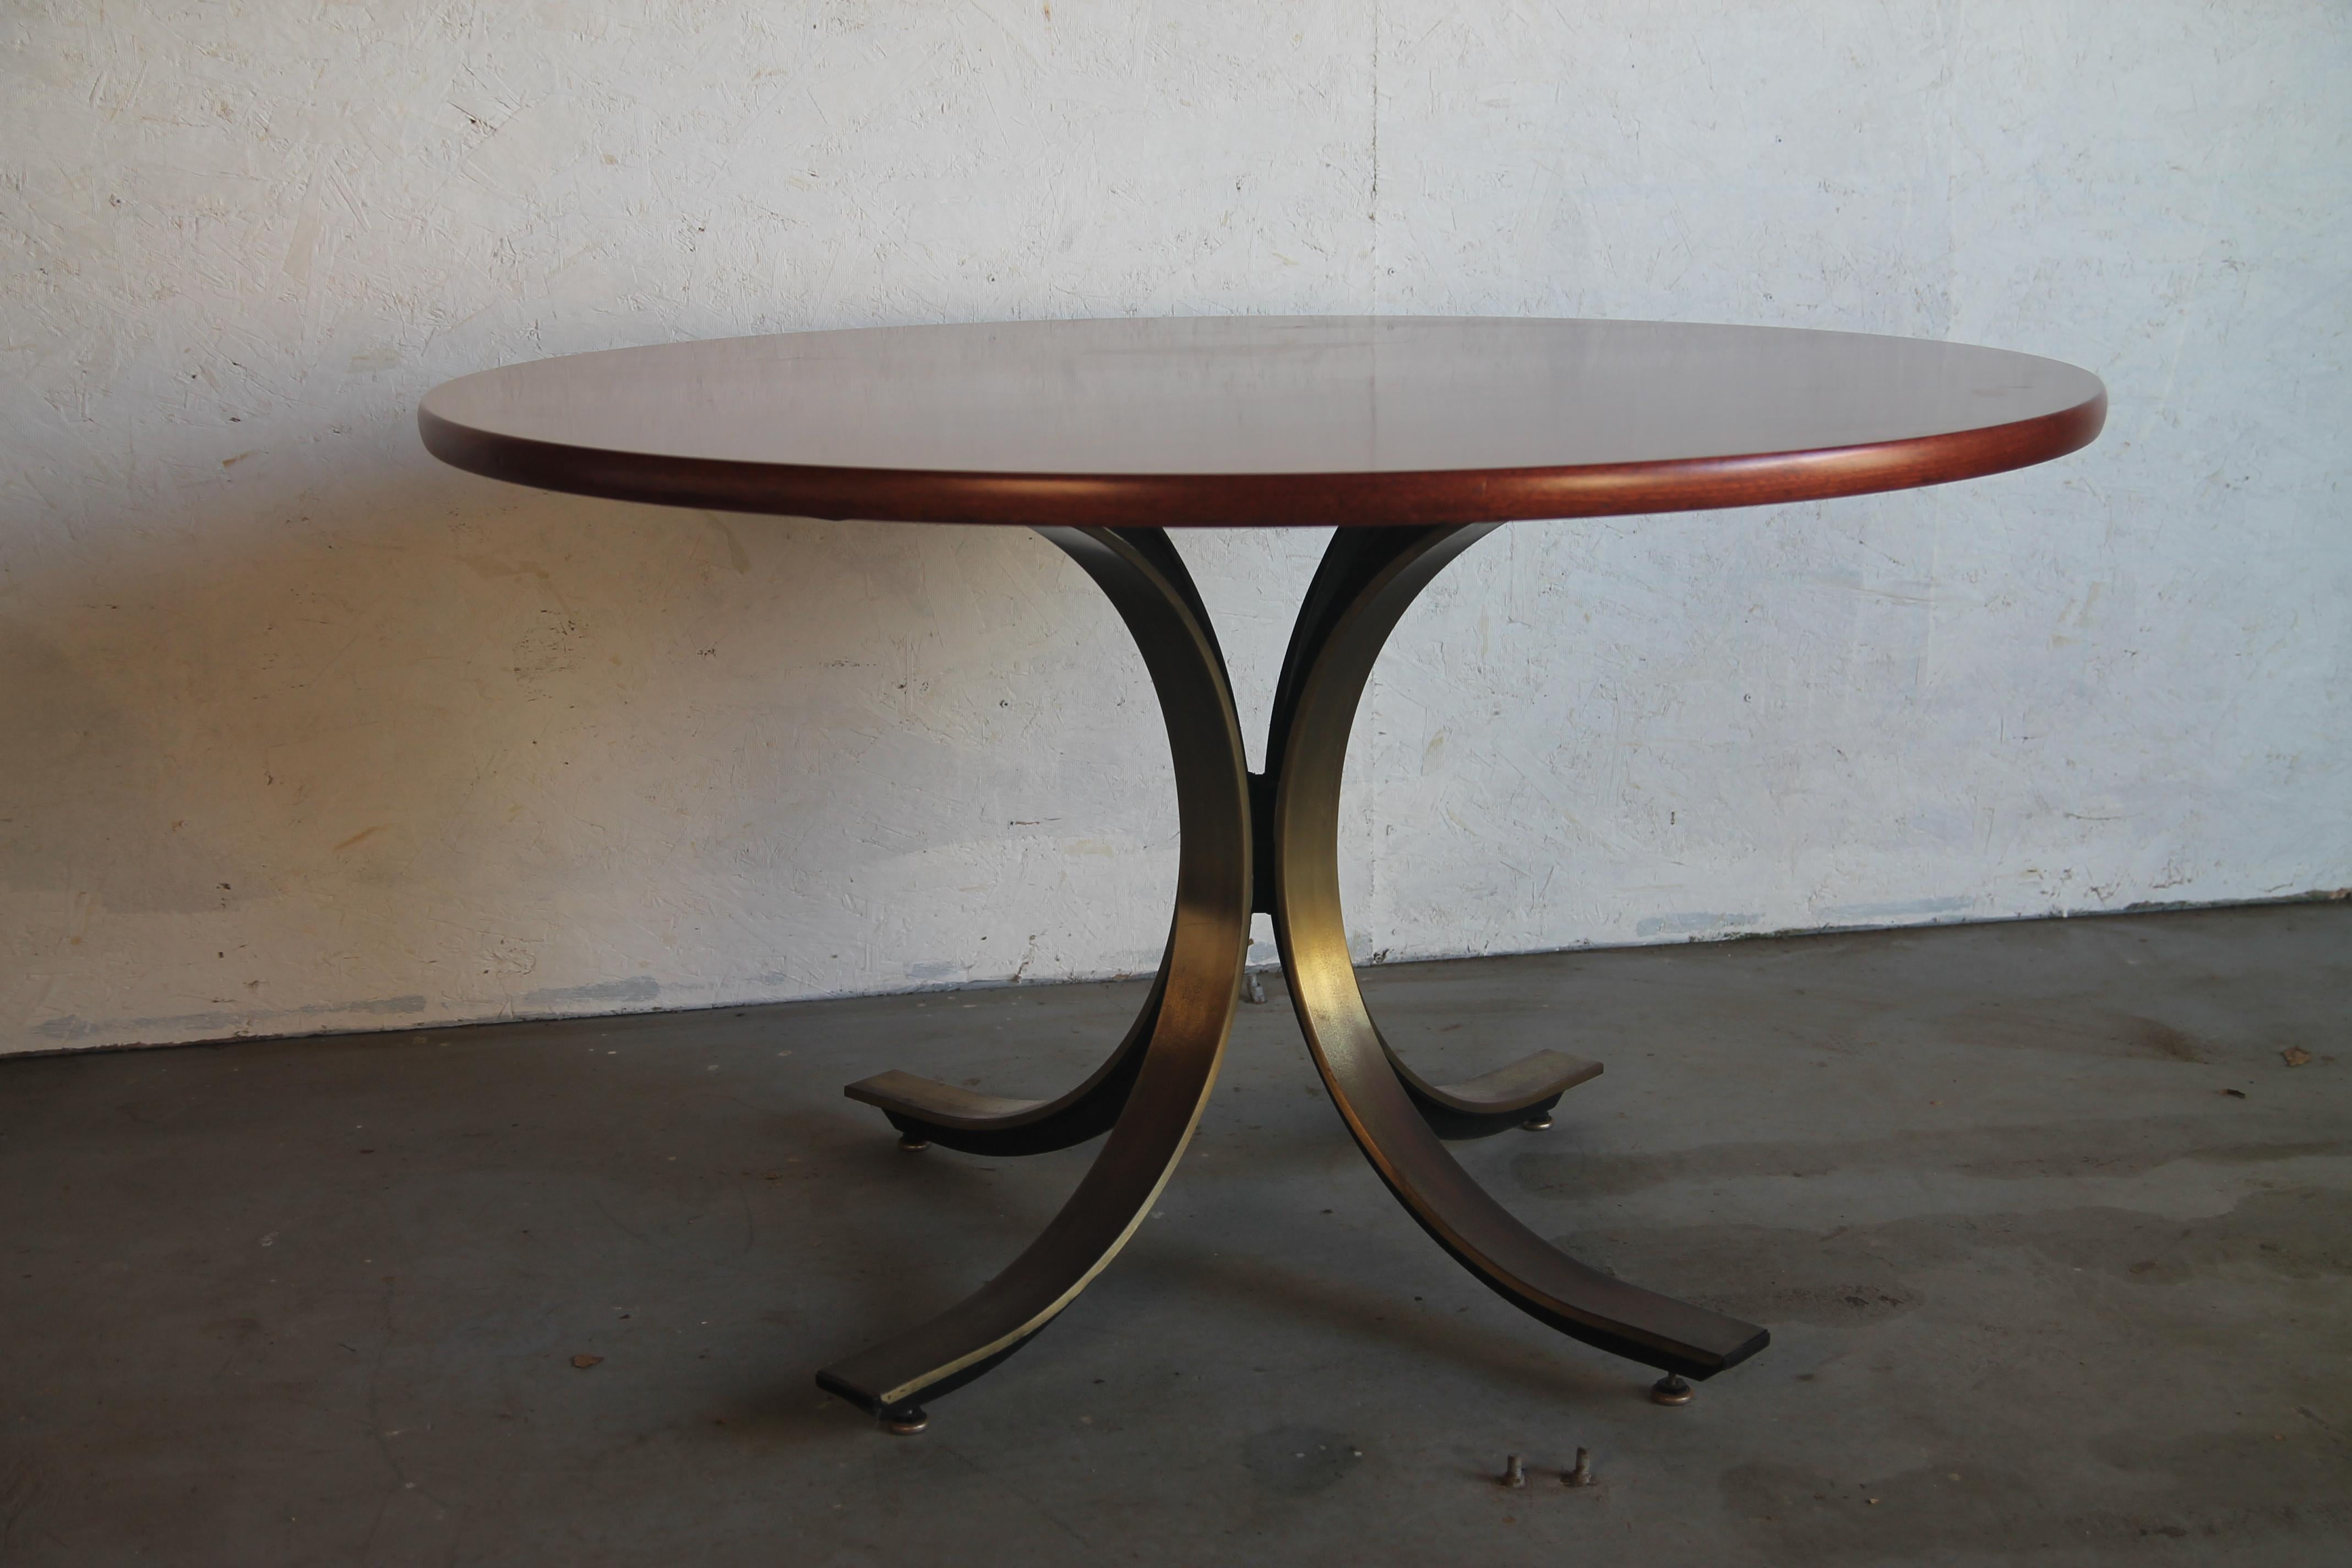 Walnut top dining/conference room table by Stow Davis. Often attributed to Osvaldo Borsani for Stow Davis. Top is in great shade and would look great in your home or office.